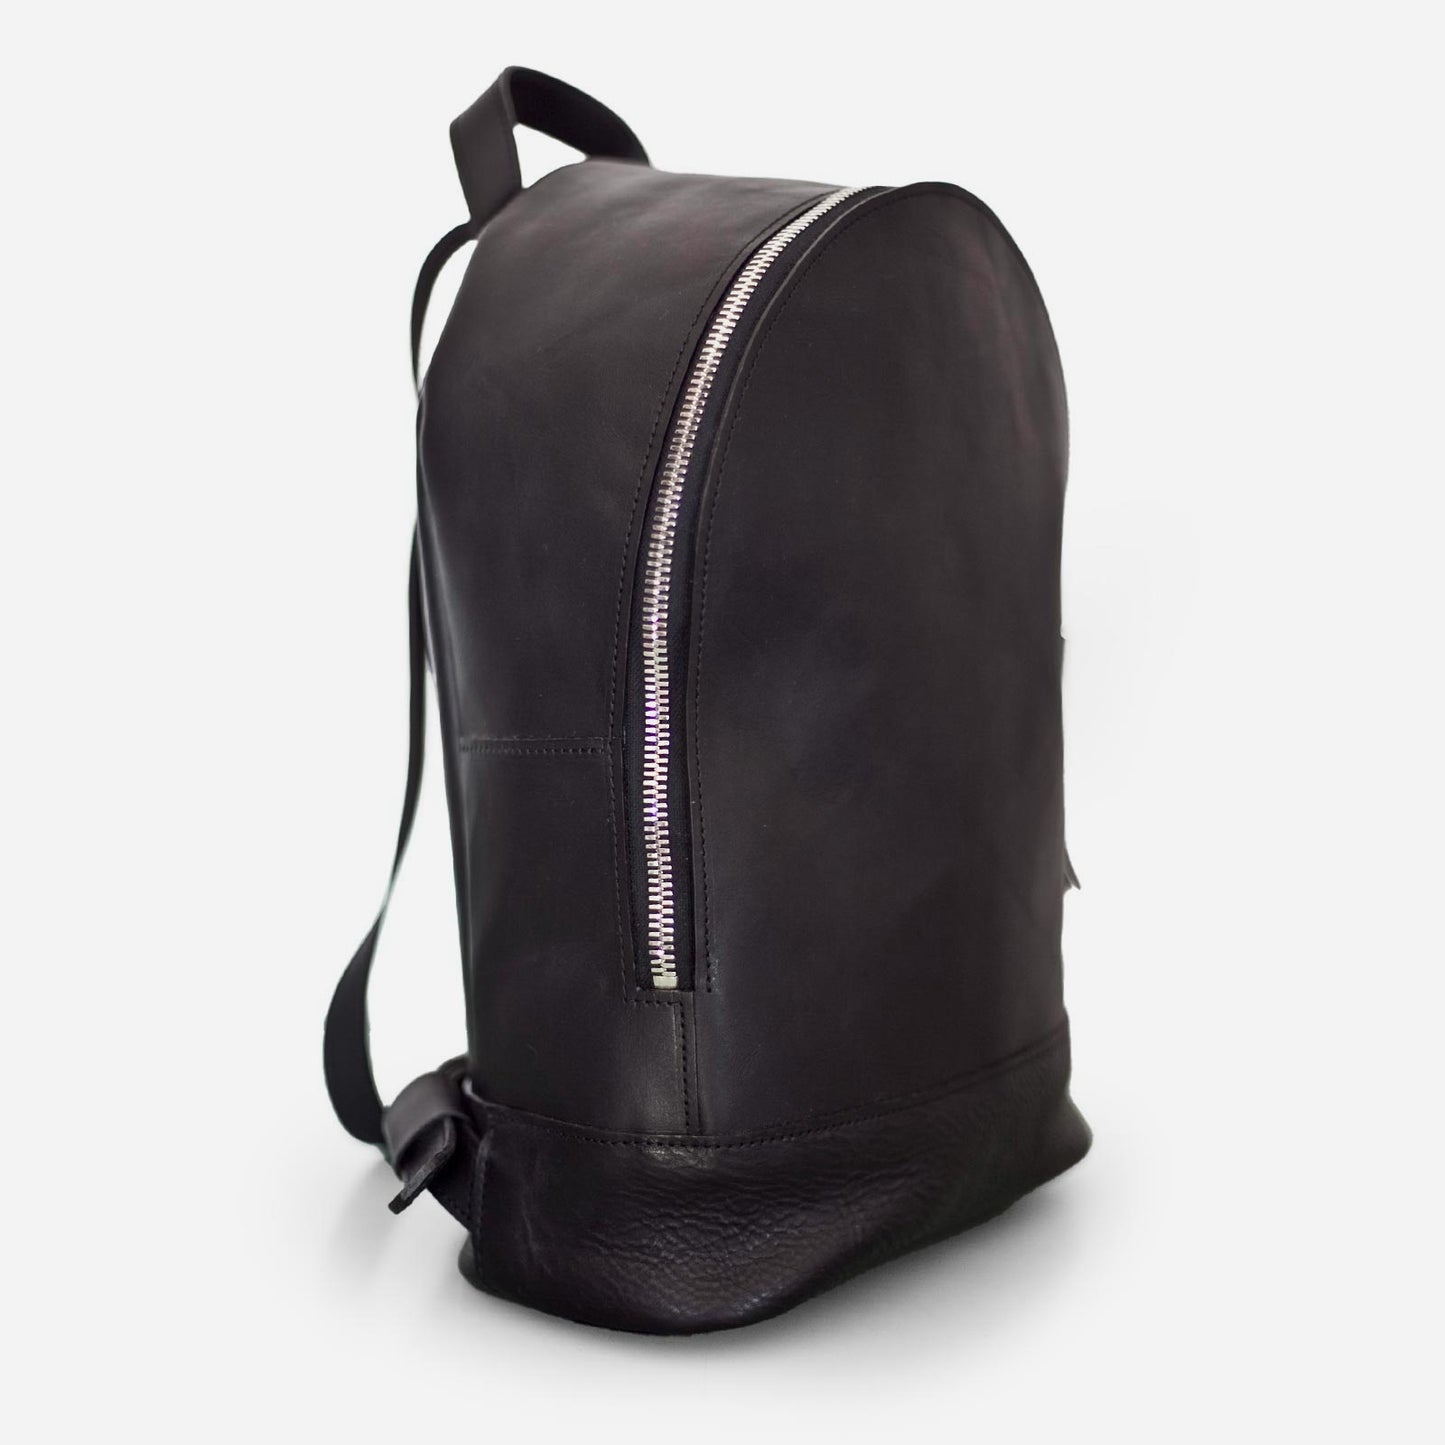 T01 backpack